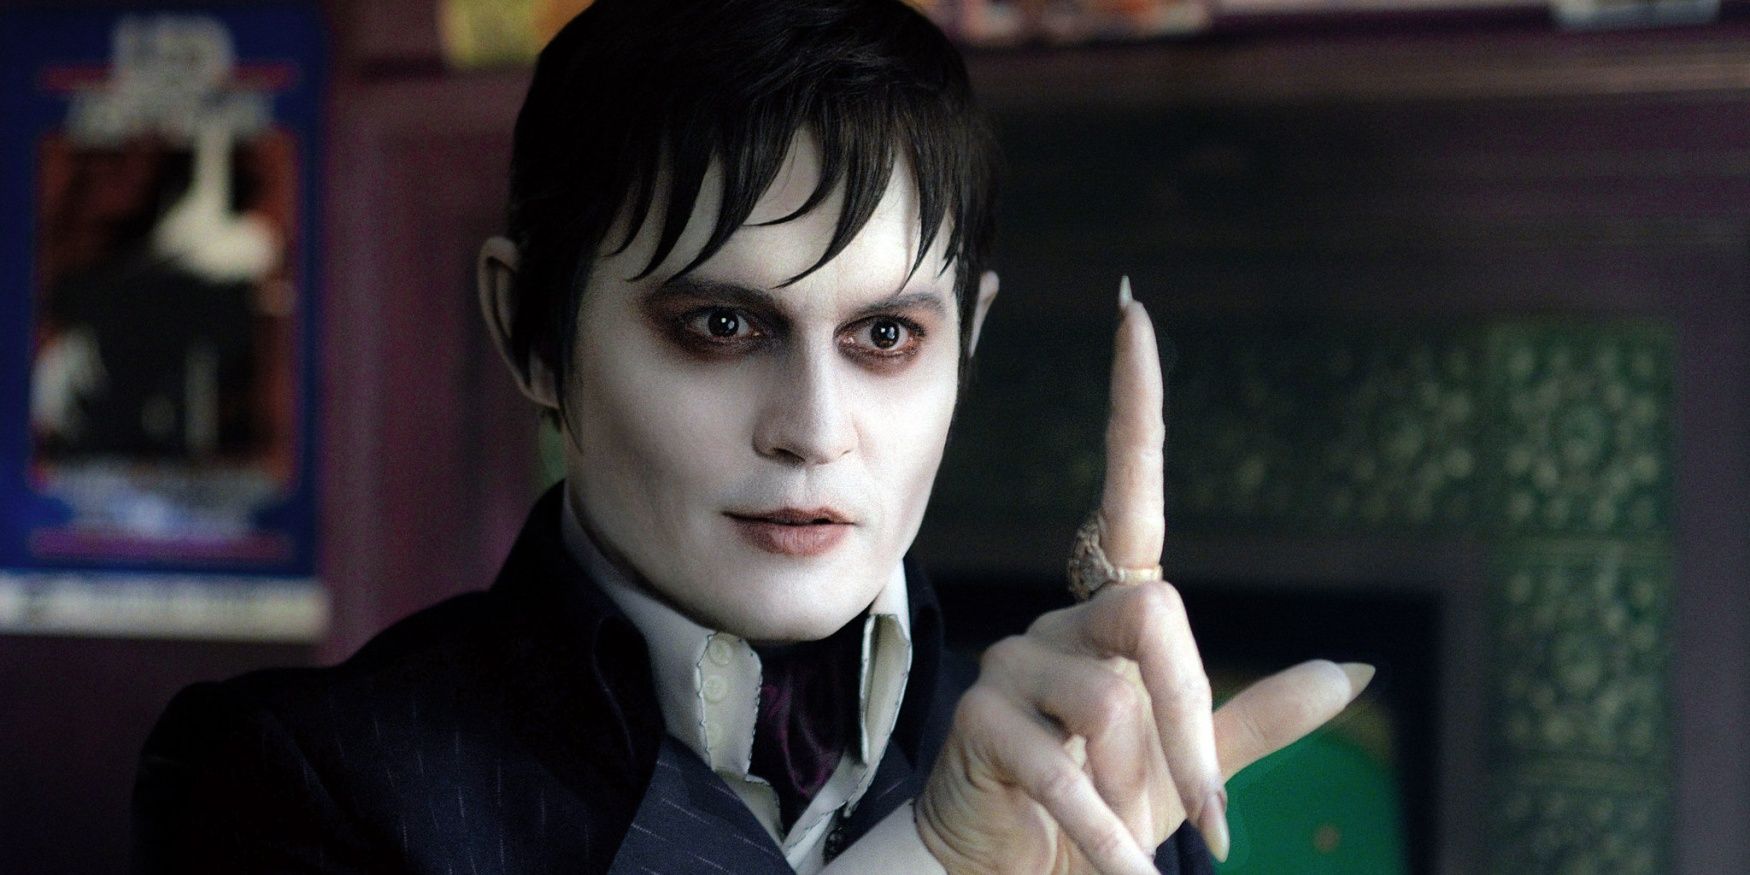 The 10 Worst Johnny Depp Roles Of The Decade (According To IMDb)